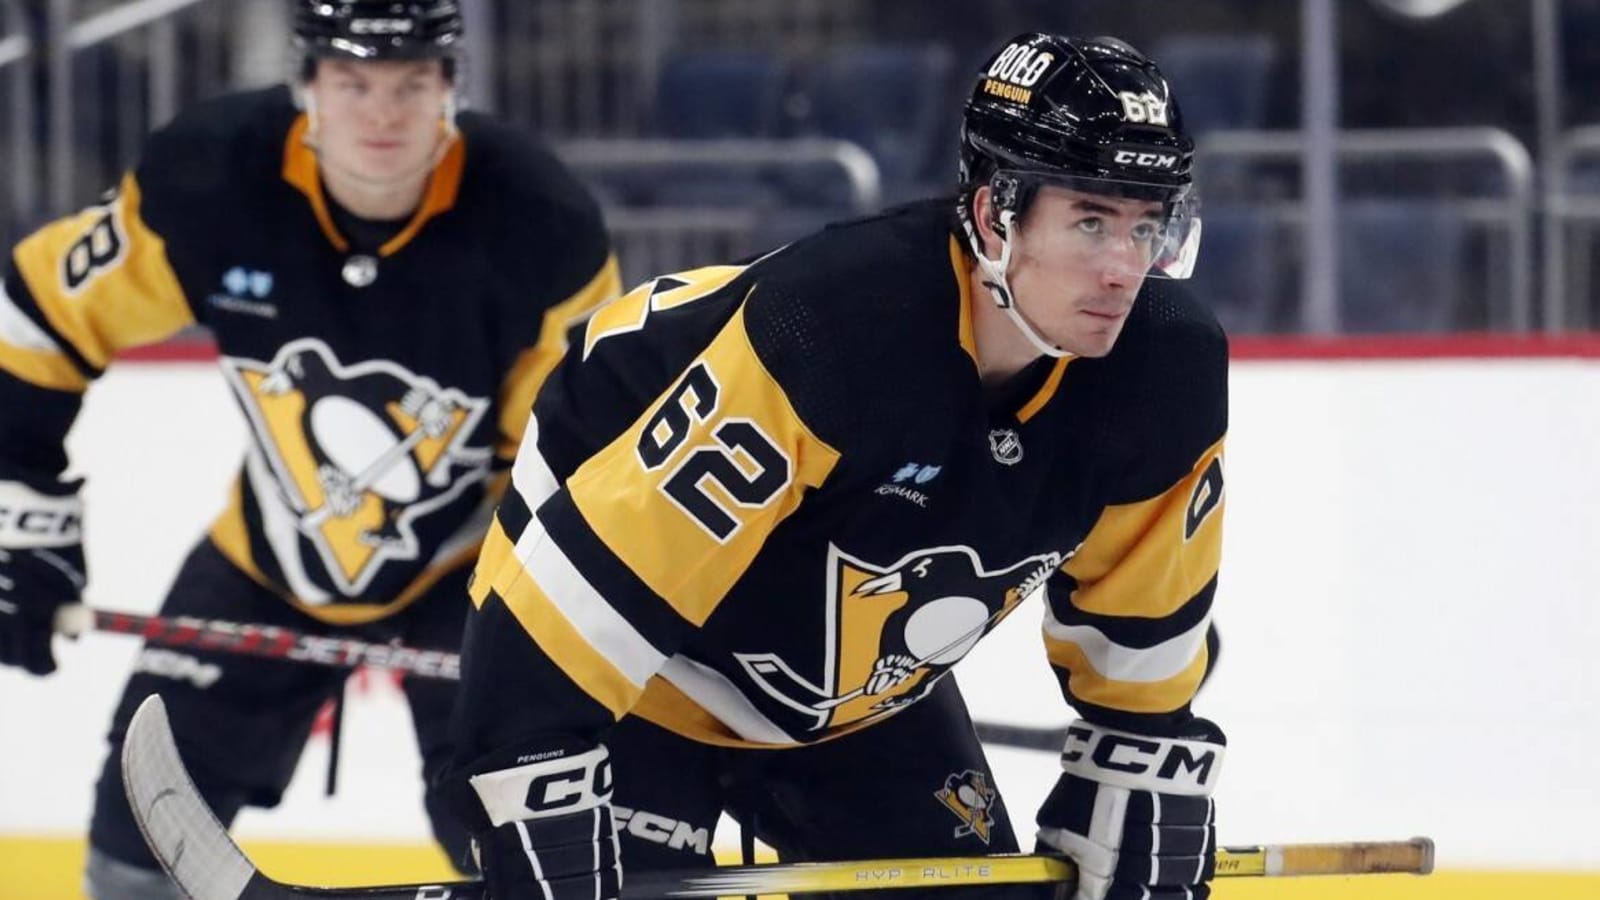 Top Penguins Prospect Among Top Names to Watch at World Juniors